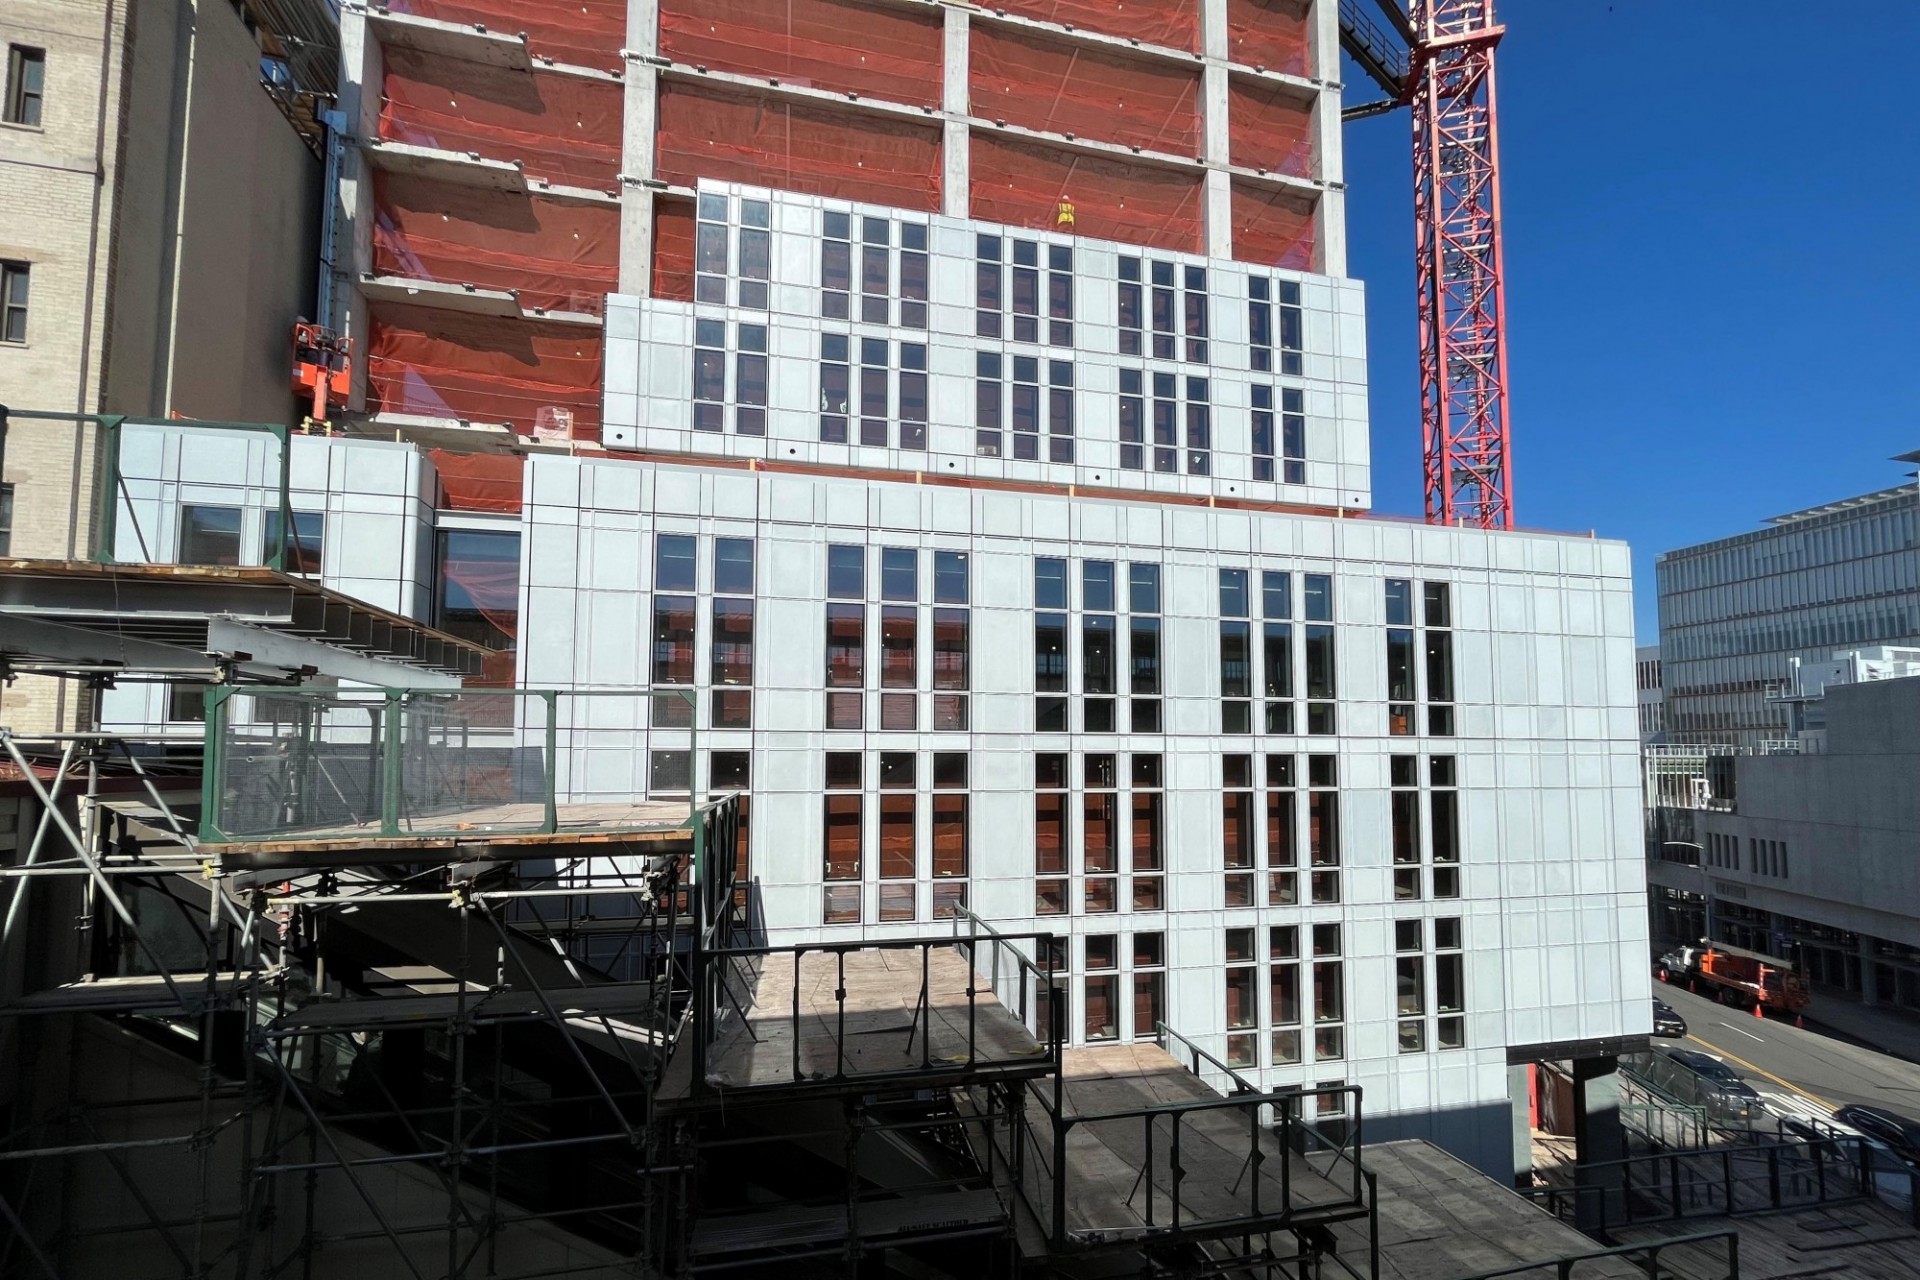 A view of the 600 W. 125th Street construction site near the street level, which has facade panels installed around it. 